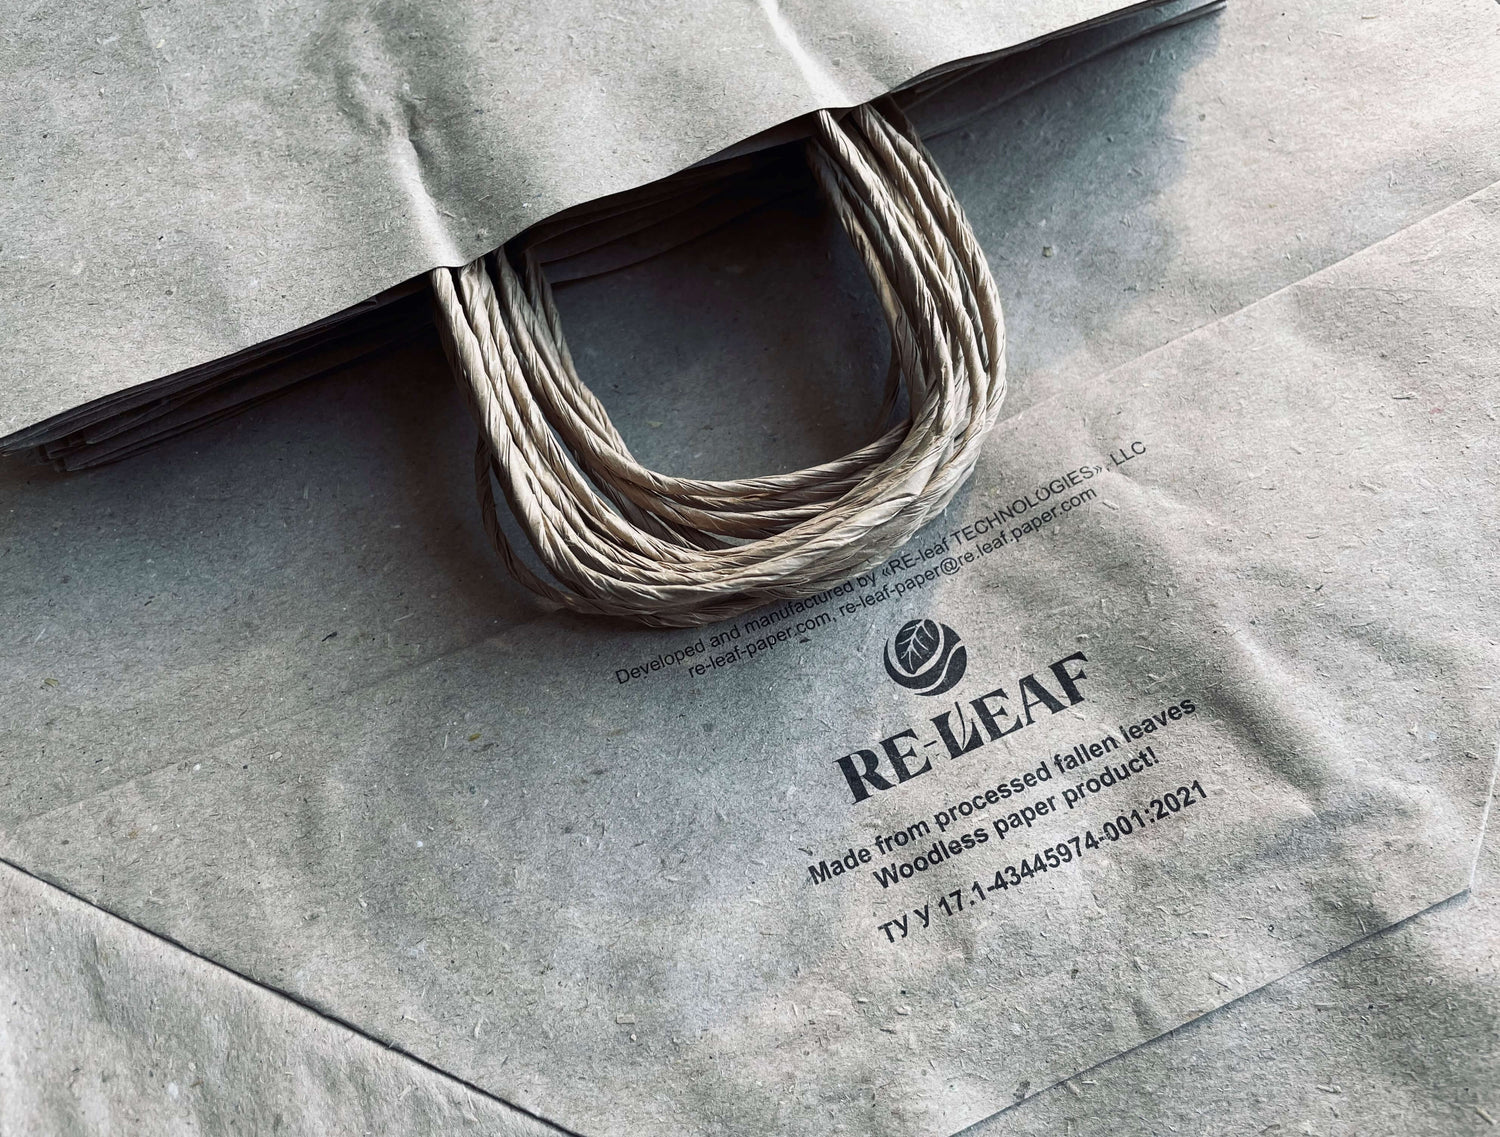 ReLeaf Paper startup Named to Fast Company’s Annual List of the World’s Most Innovative Companies for 2023